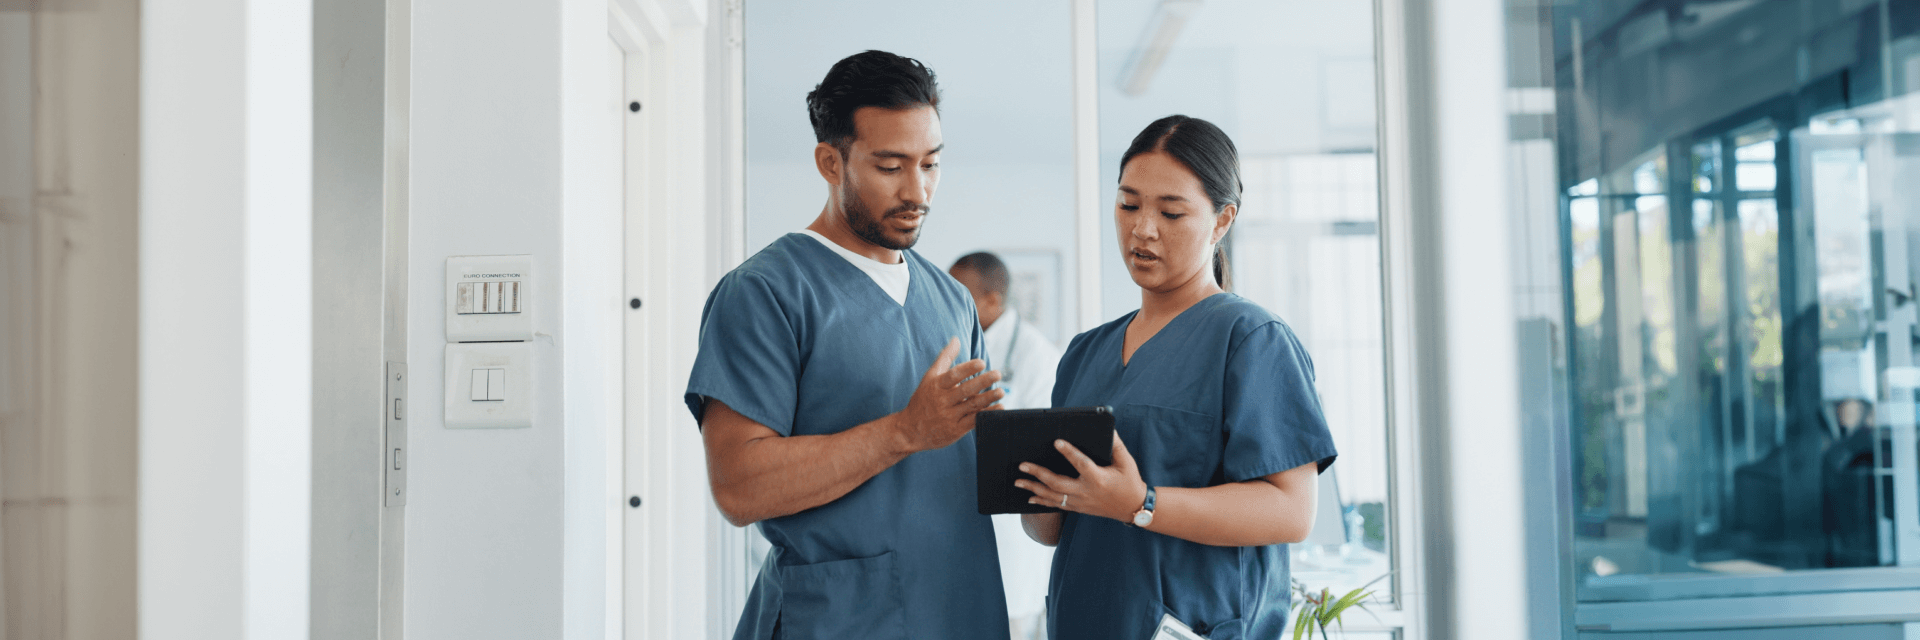 Accelerating-the-shift-to-value-based-care-with-binah-ai